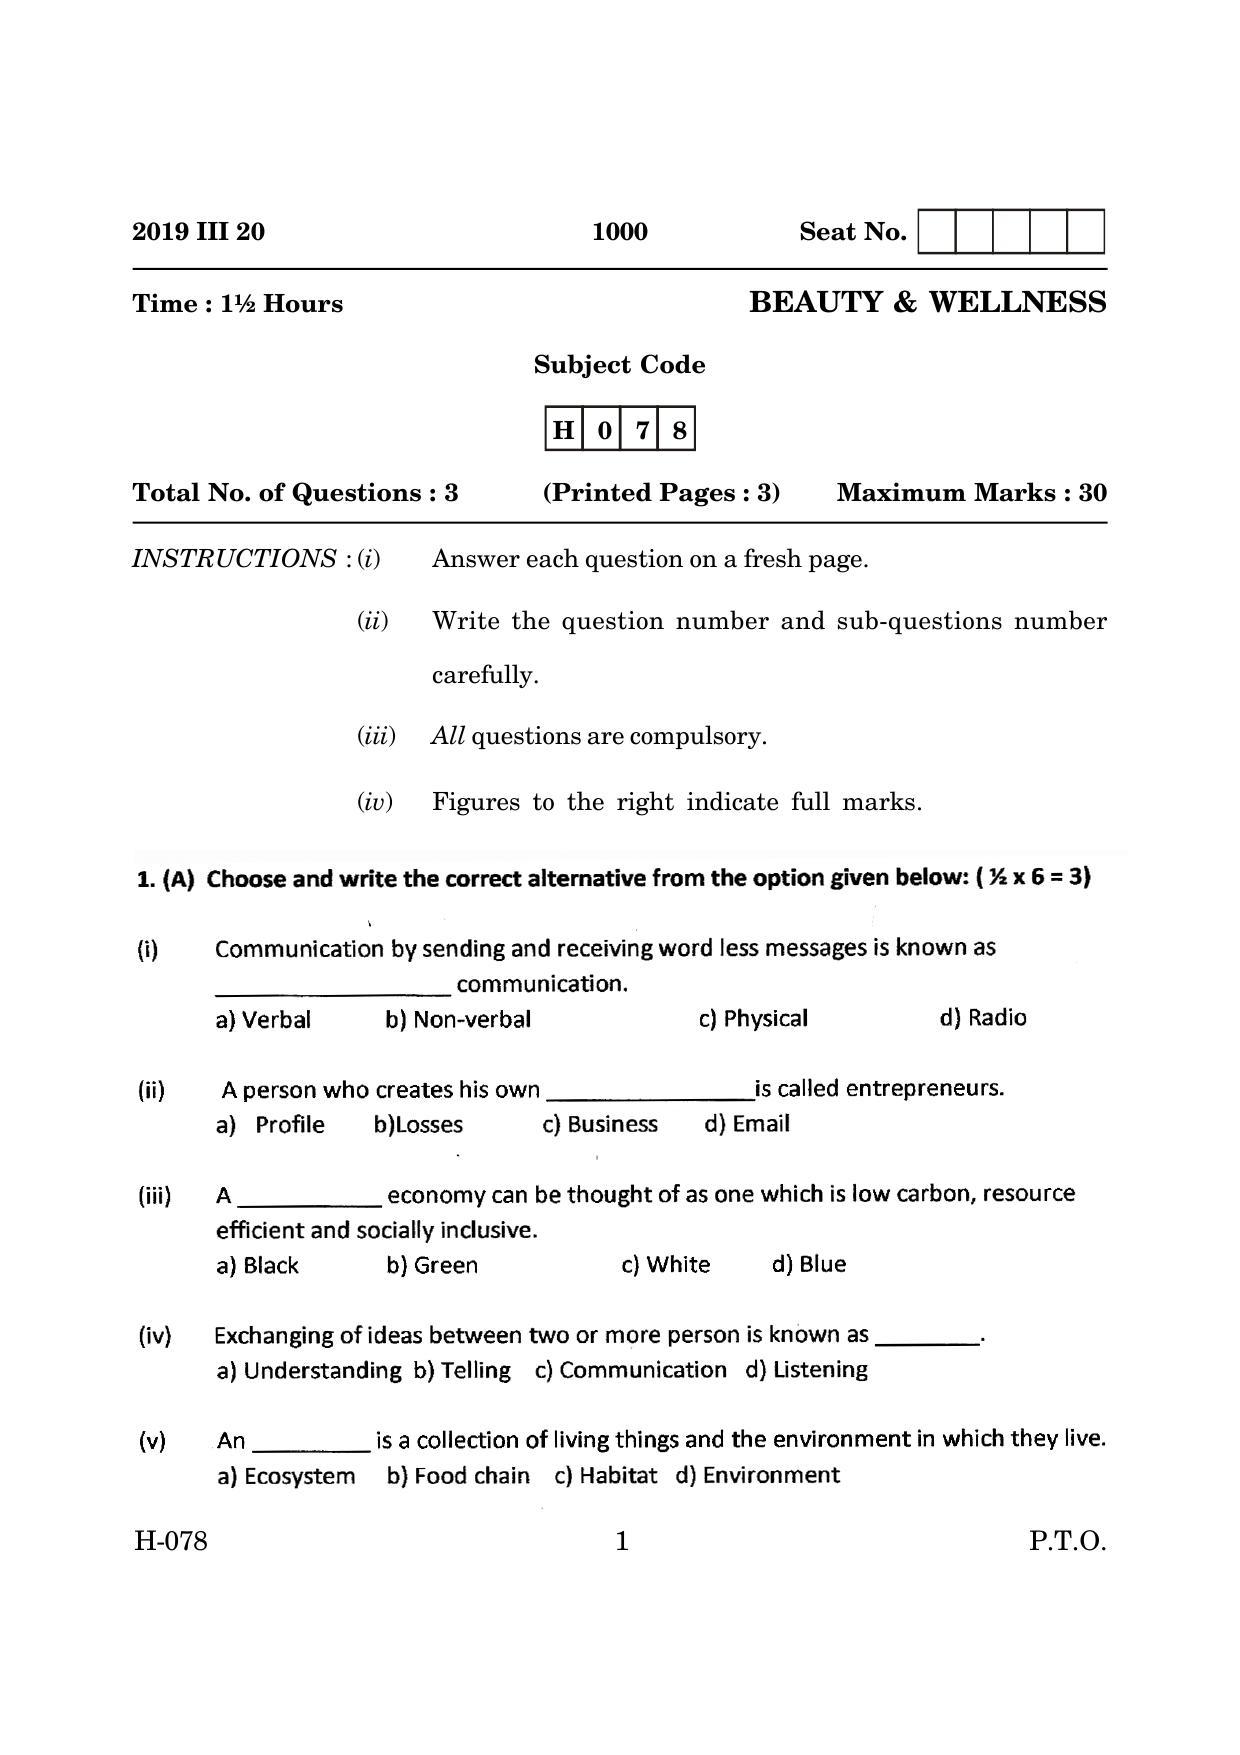 Goa Board Class 12 Beauty & Wellness   (March 2019) Question Paper - Page 1